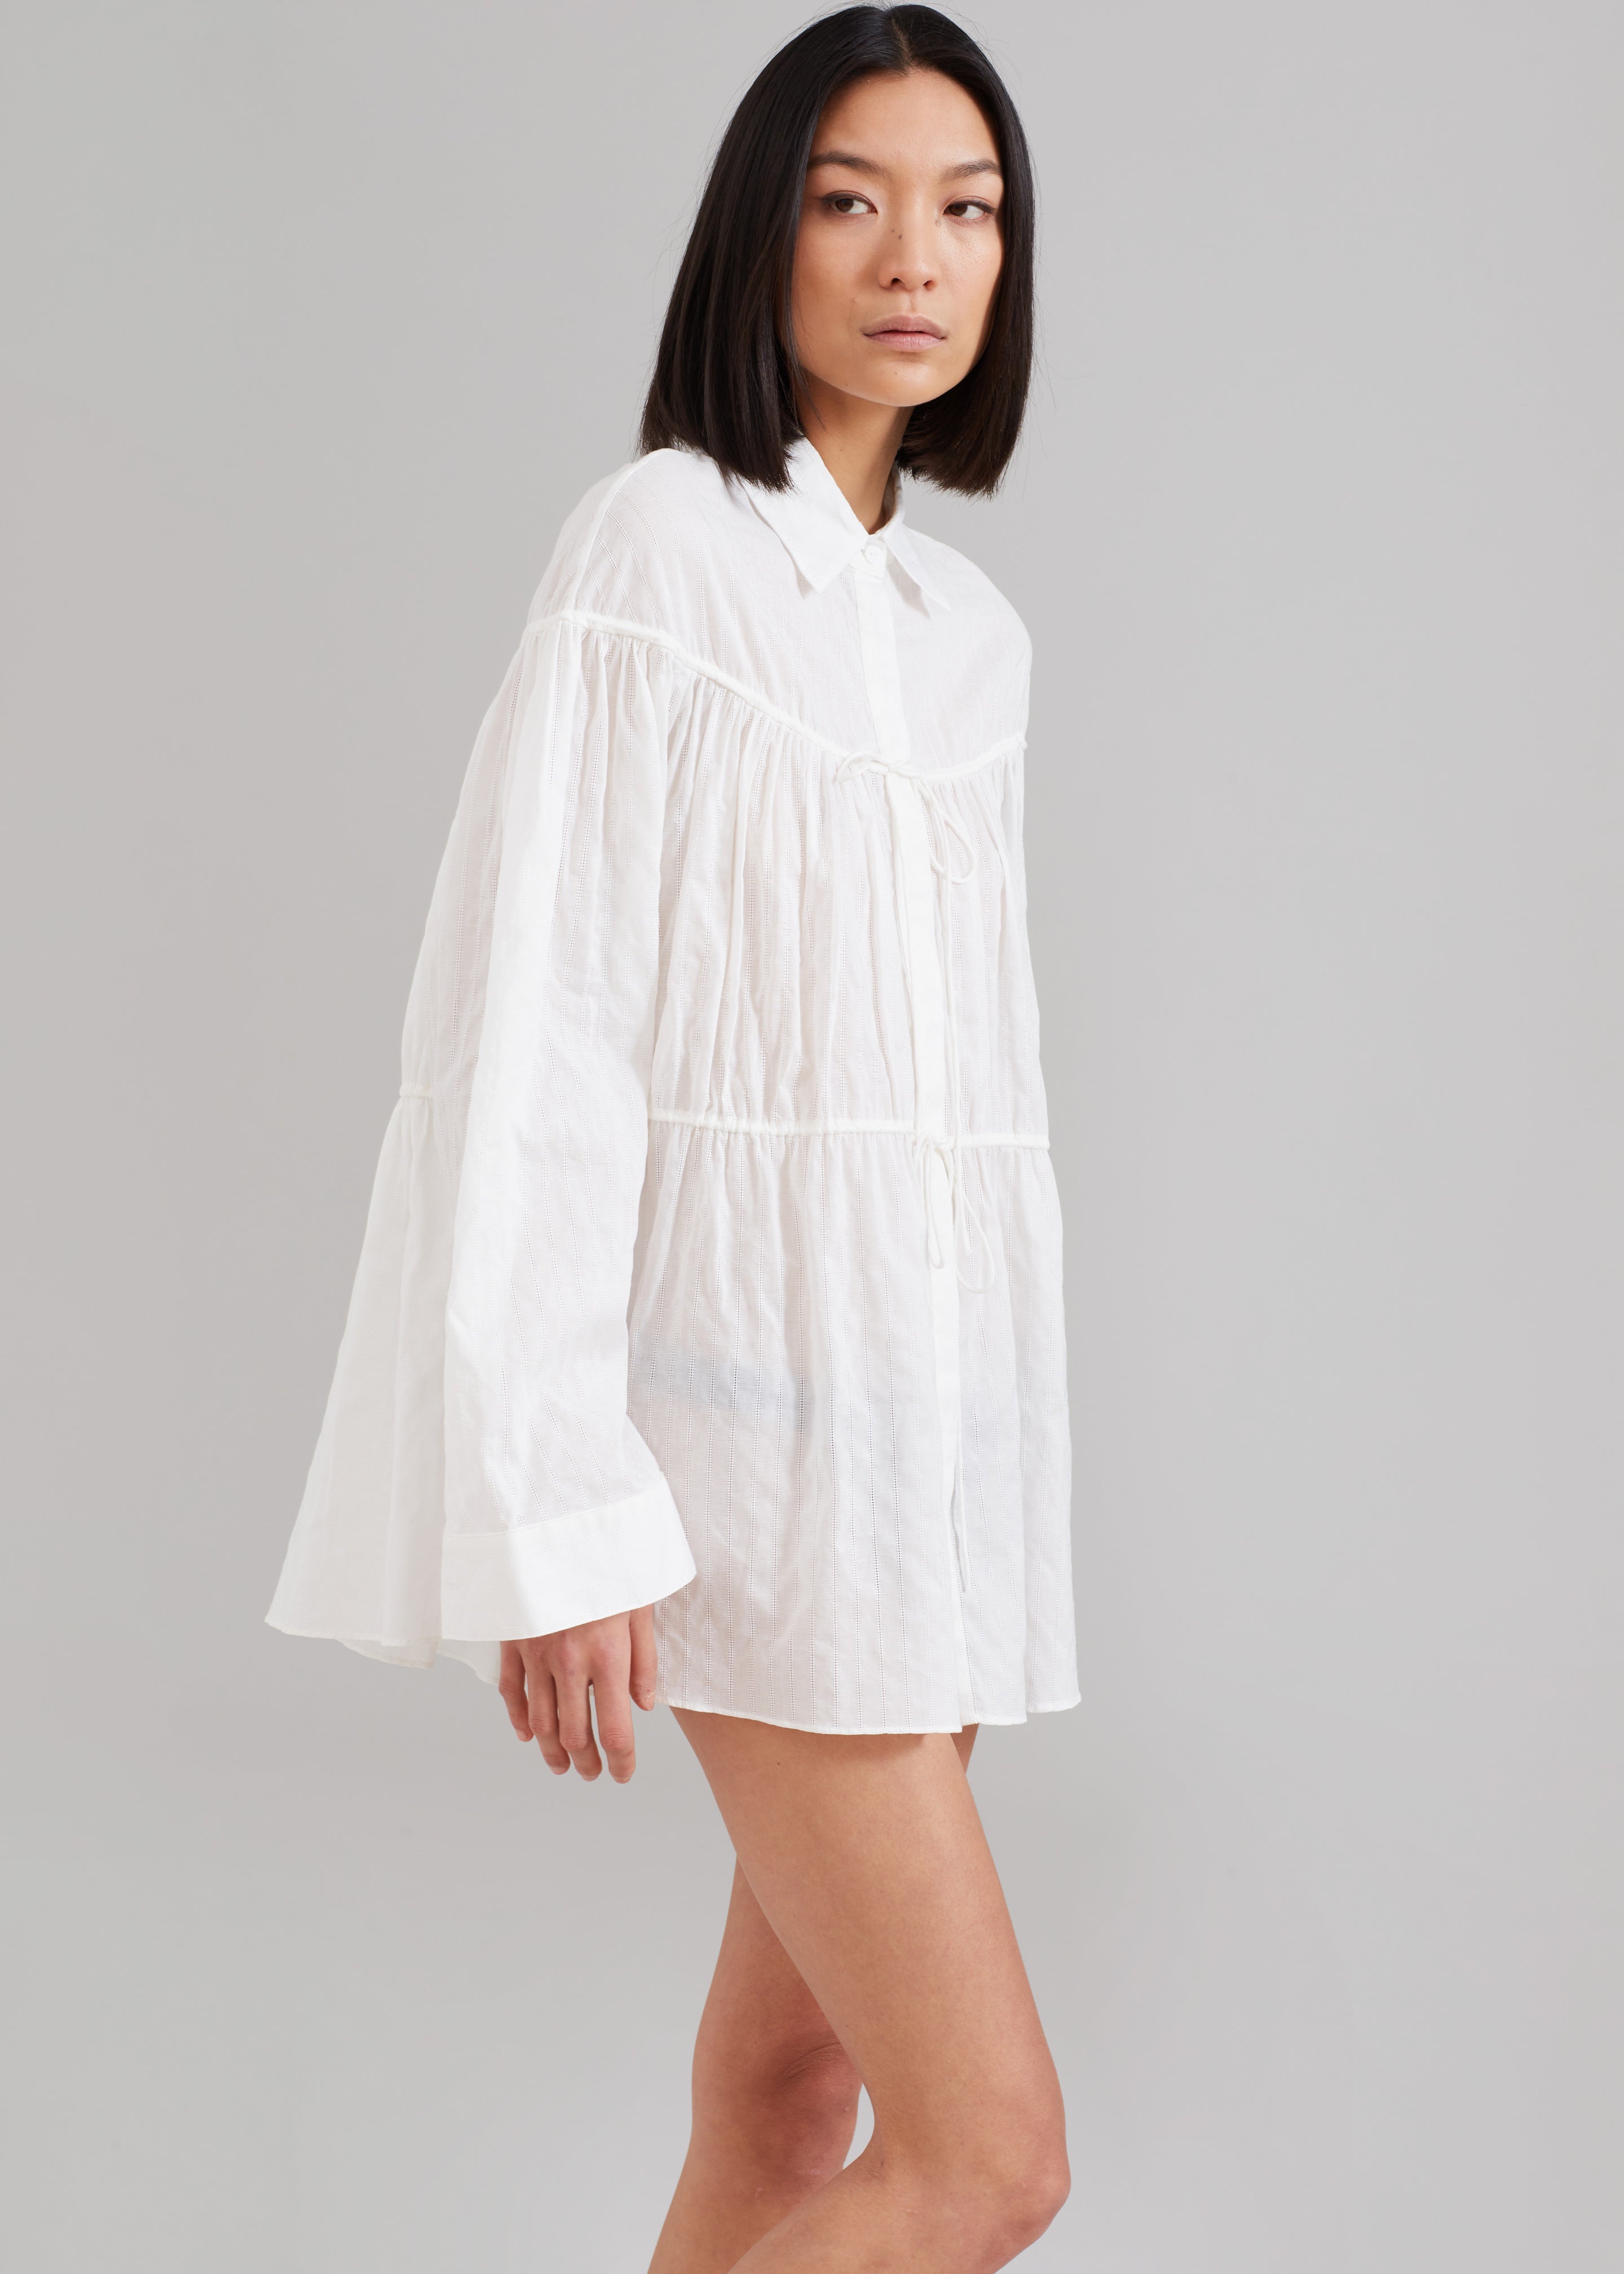 Matteau Embroidered Drawcord Tunic - White - 7